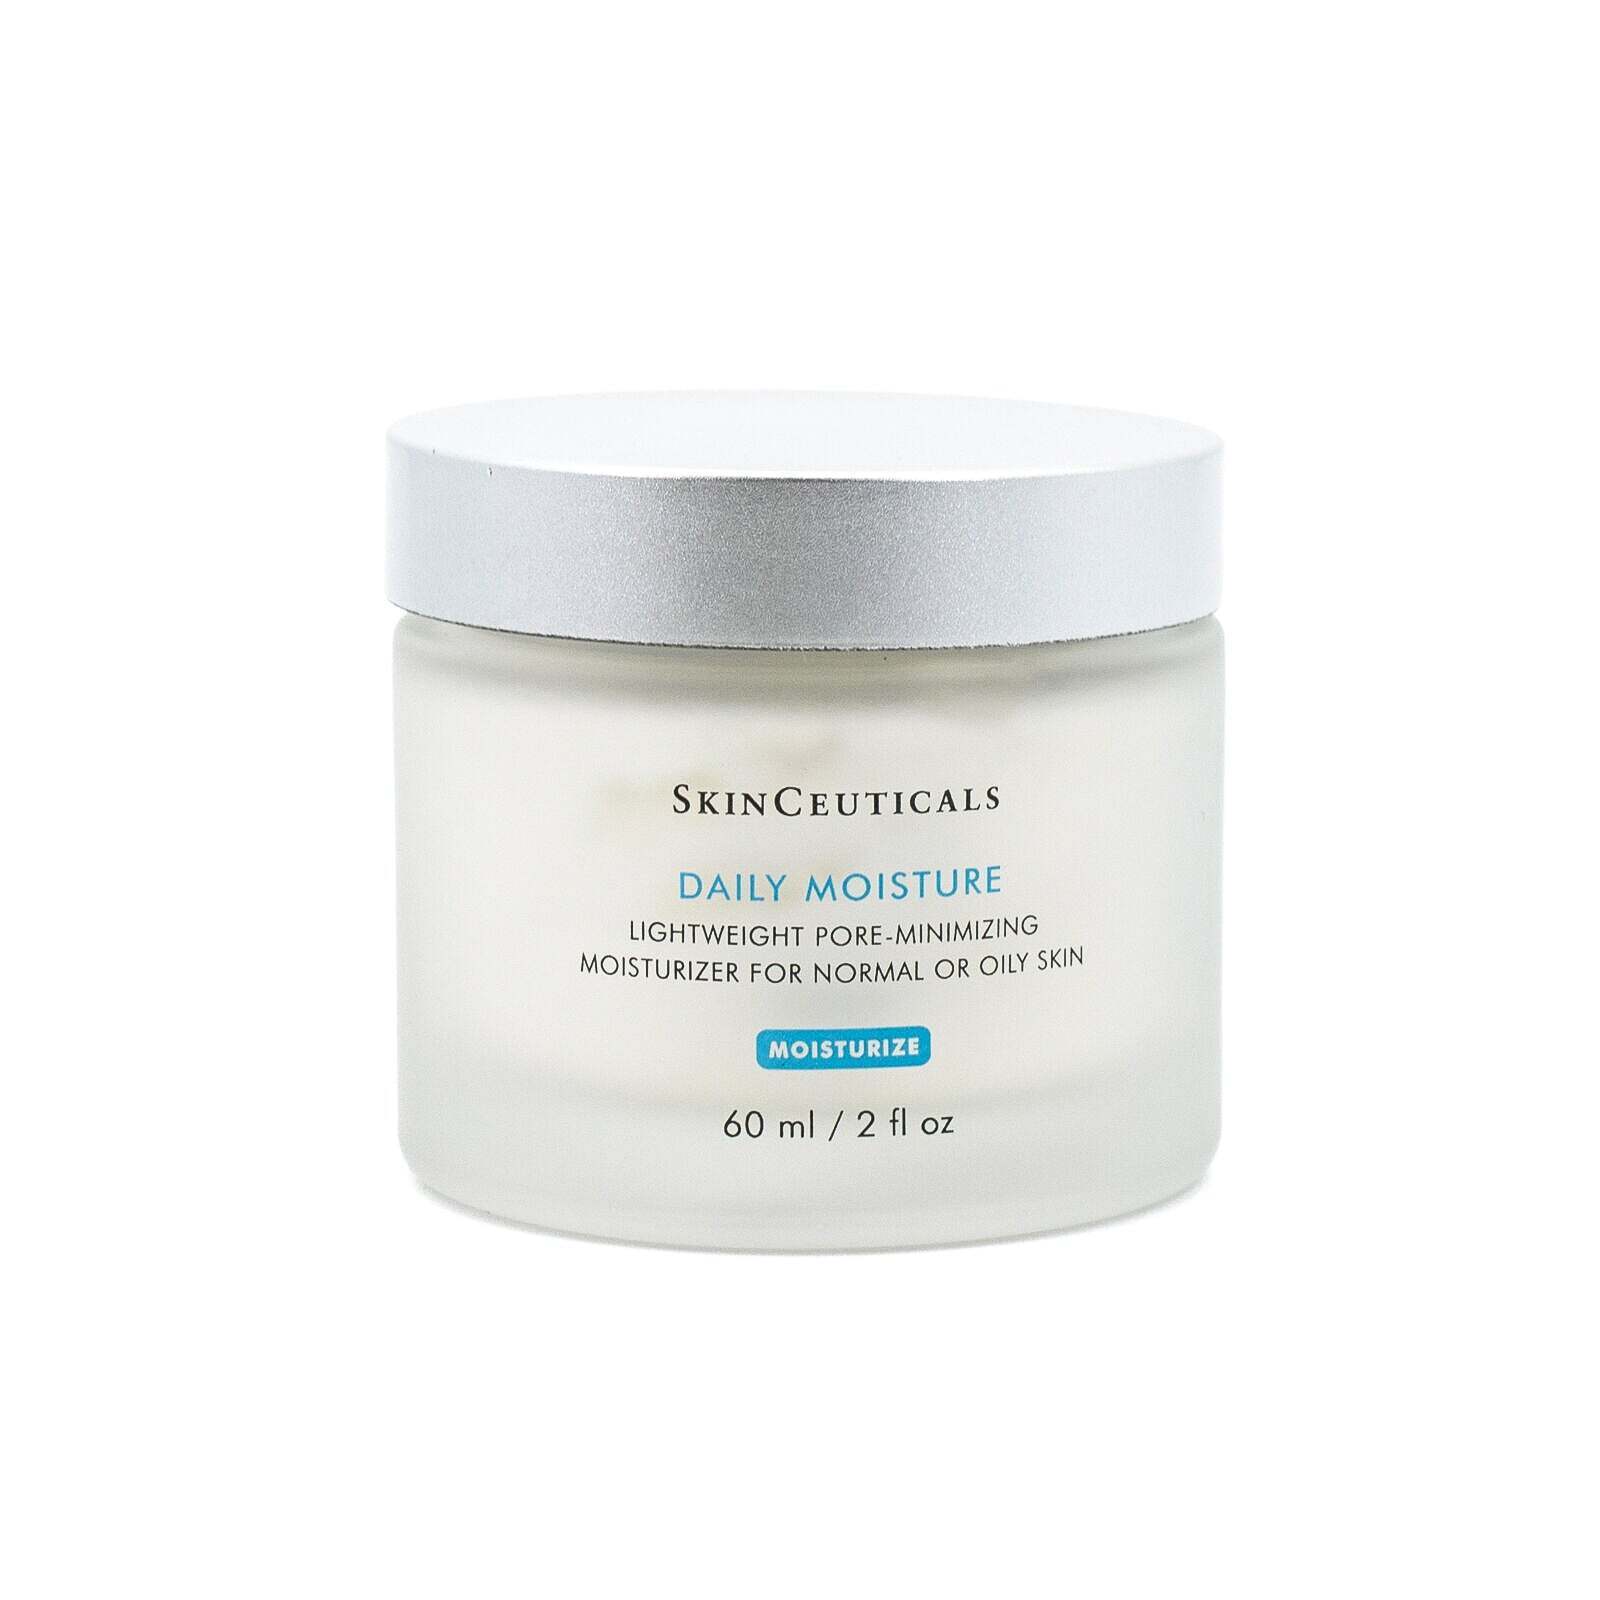 SKINCEUTICALS Daily Moisture 2oz - Missing Box